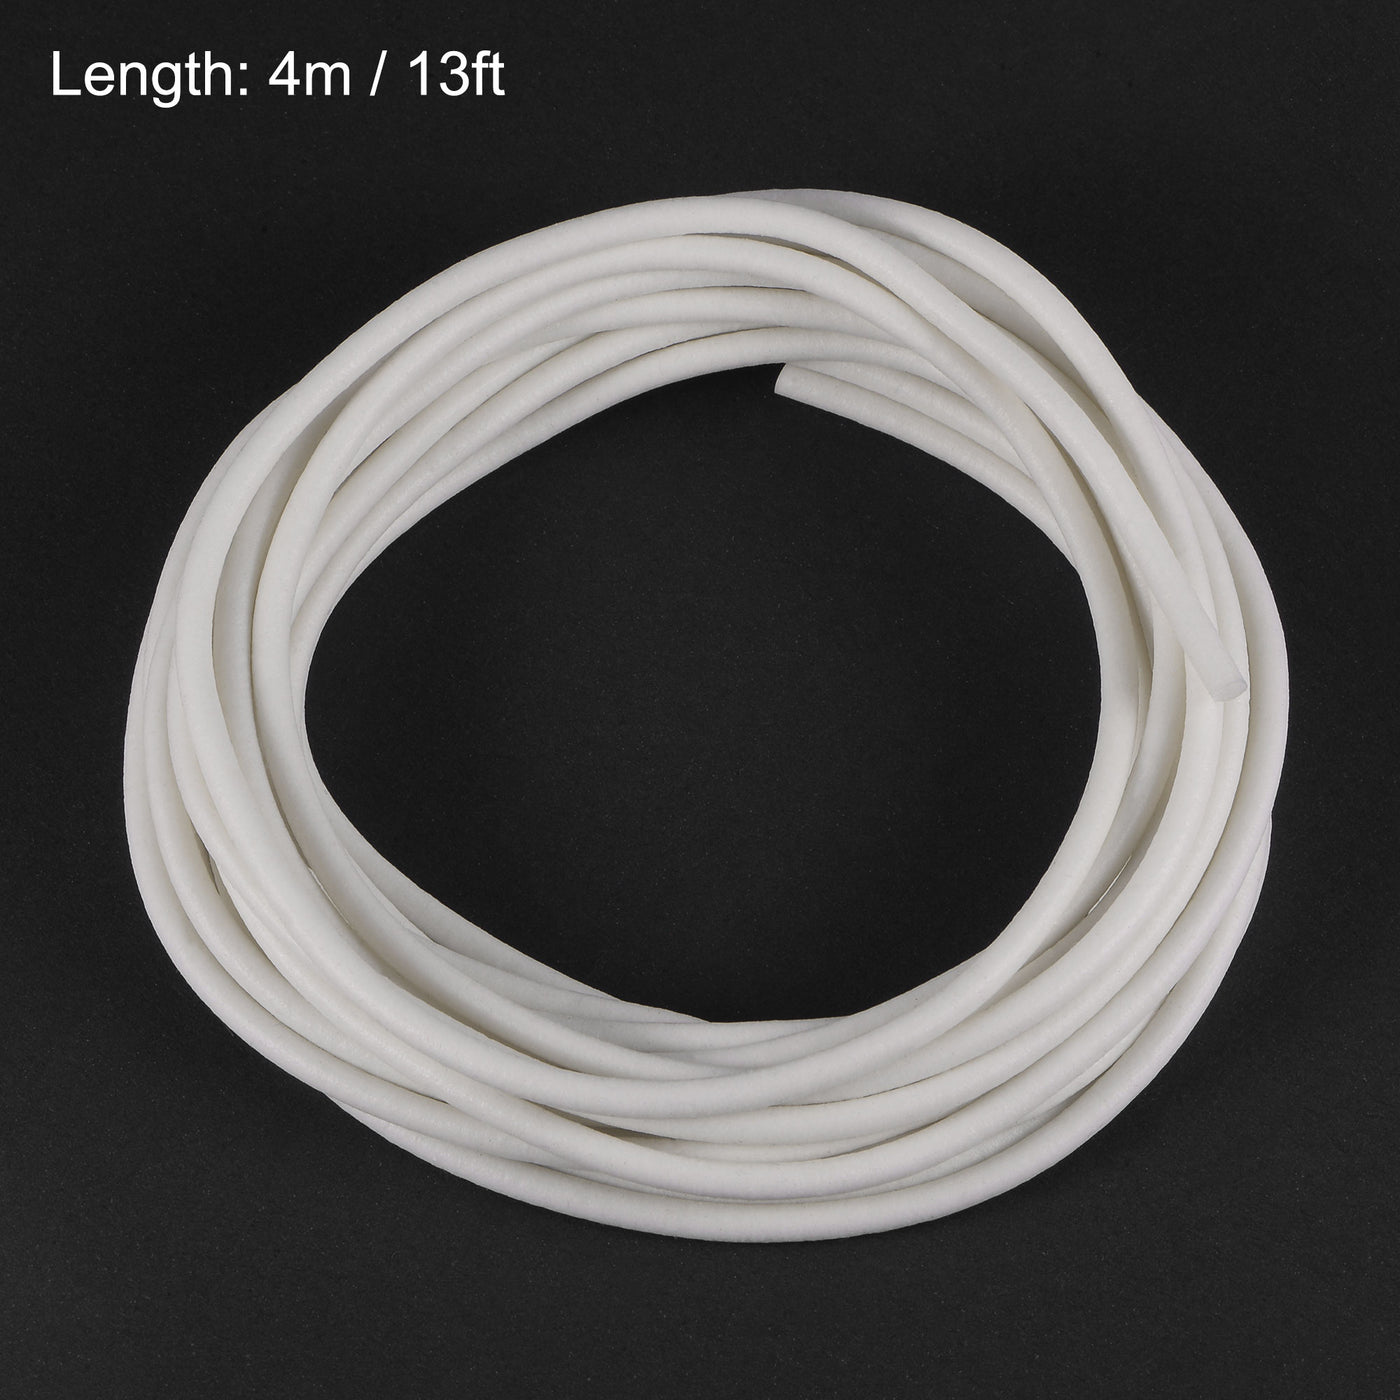 uxcell Uxcell 1/8"(3mm) Soft Silicone Bending Insert Tube for Rigid Tubing 13ft White